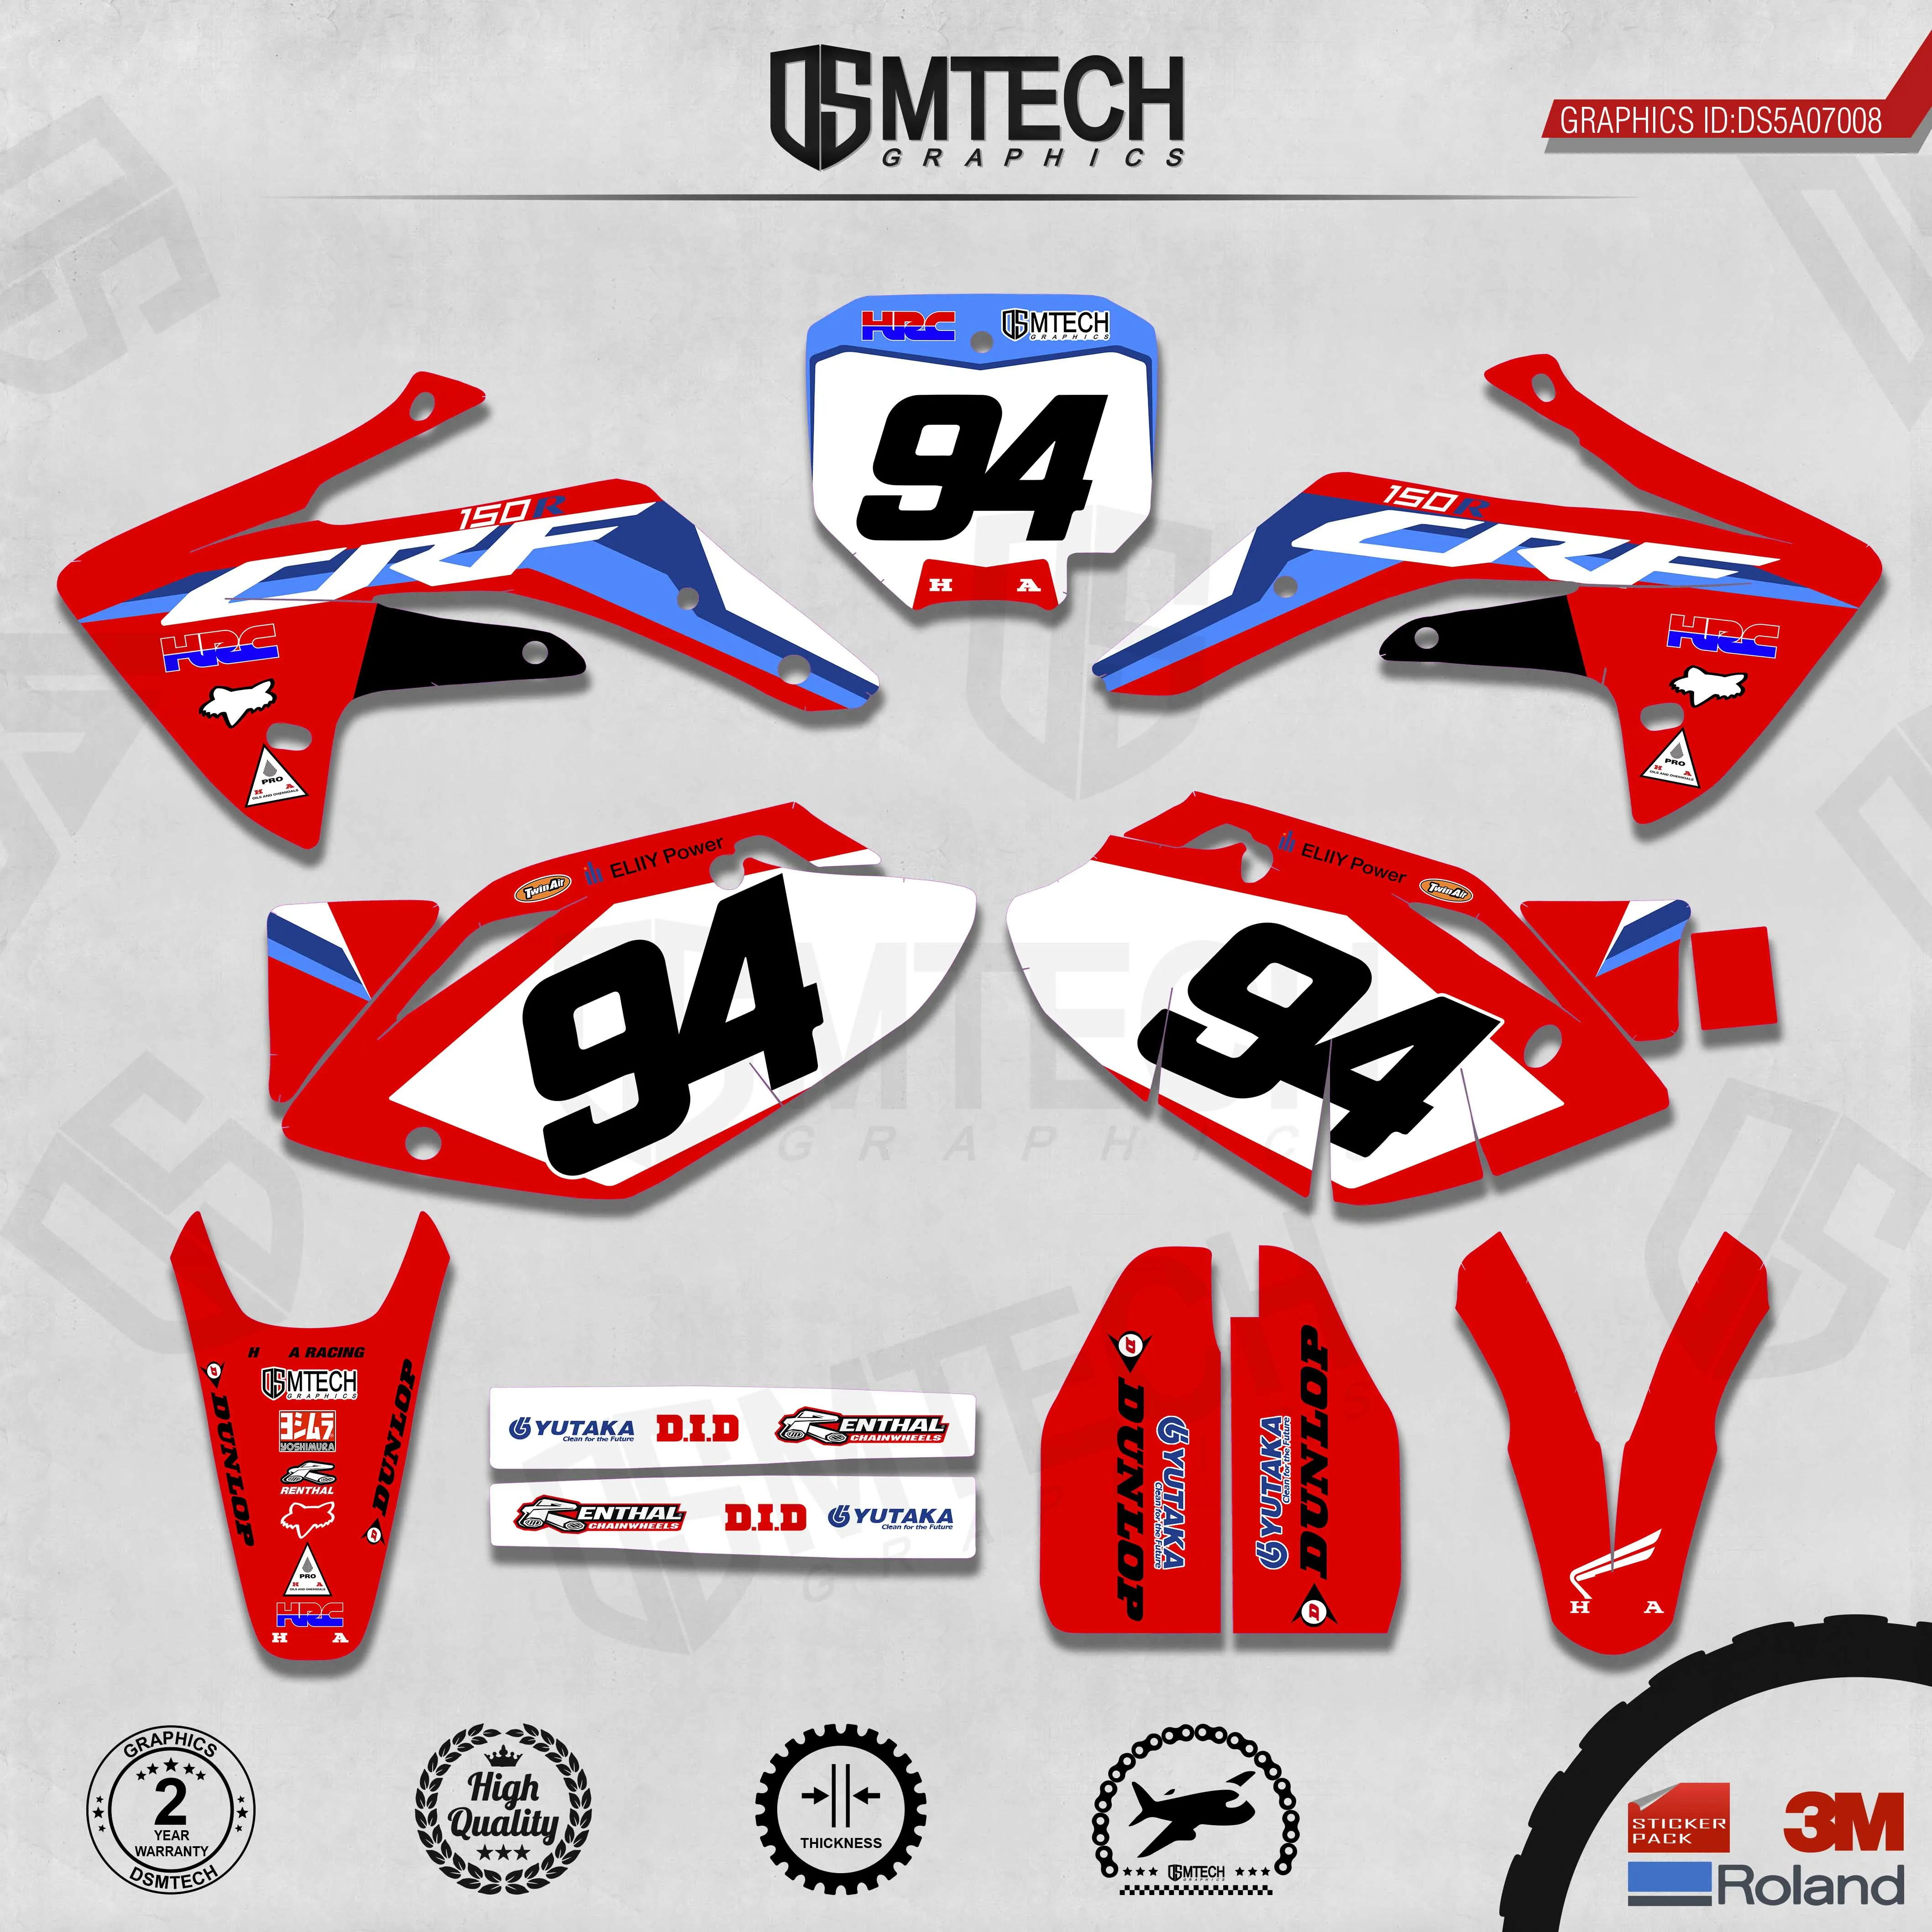 DSMTECH Customized Team Graphics Backgrounds Decals 3M Custom Stickers For 2007-2009 2010-2012 2013-2015 2016-2020 CRF150R 008